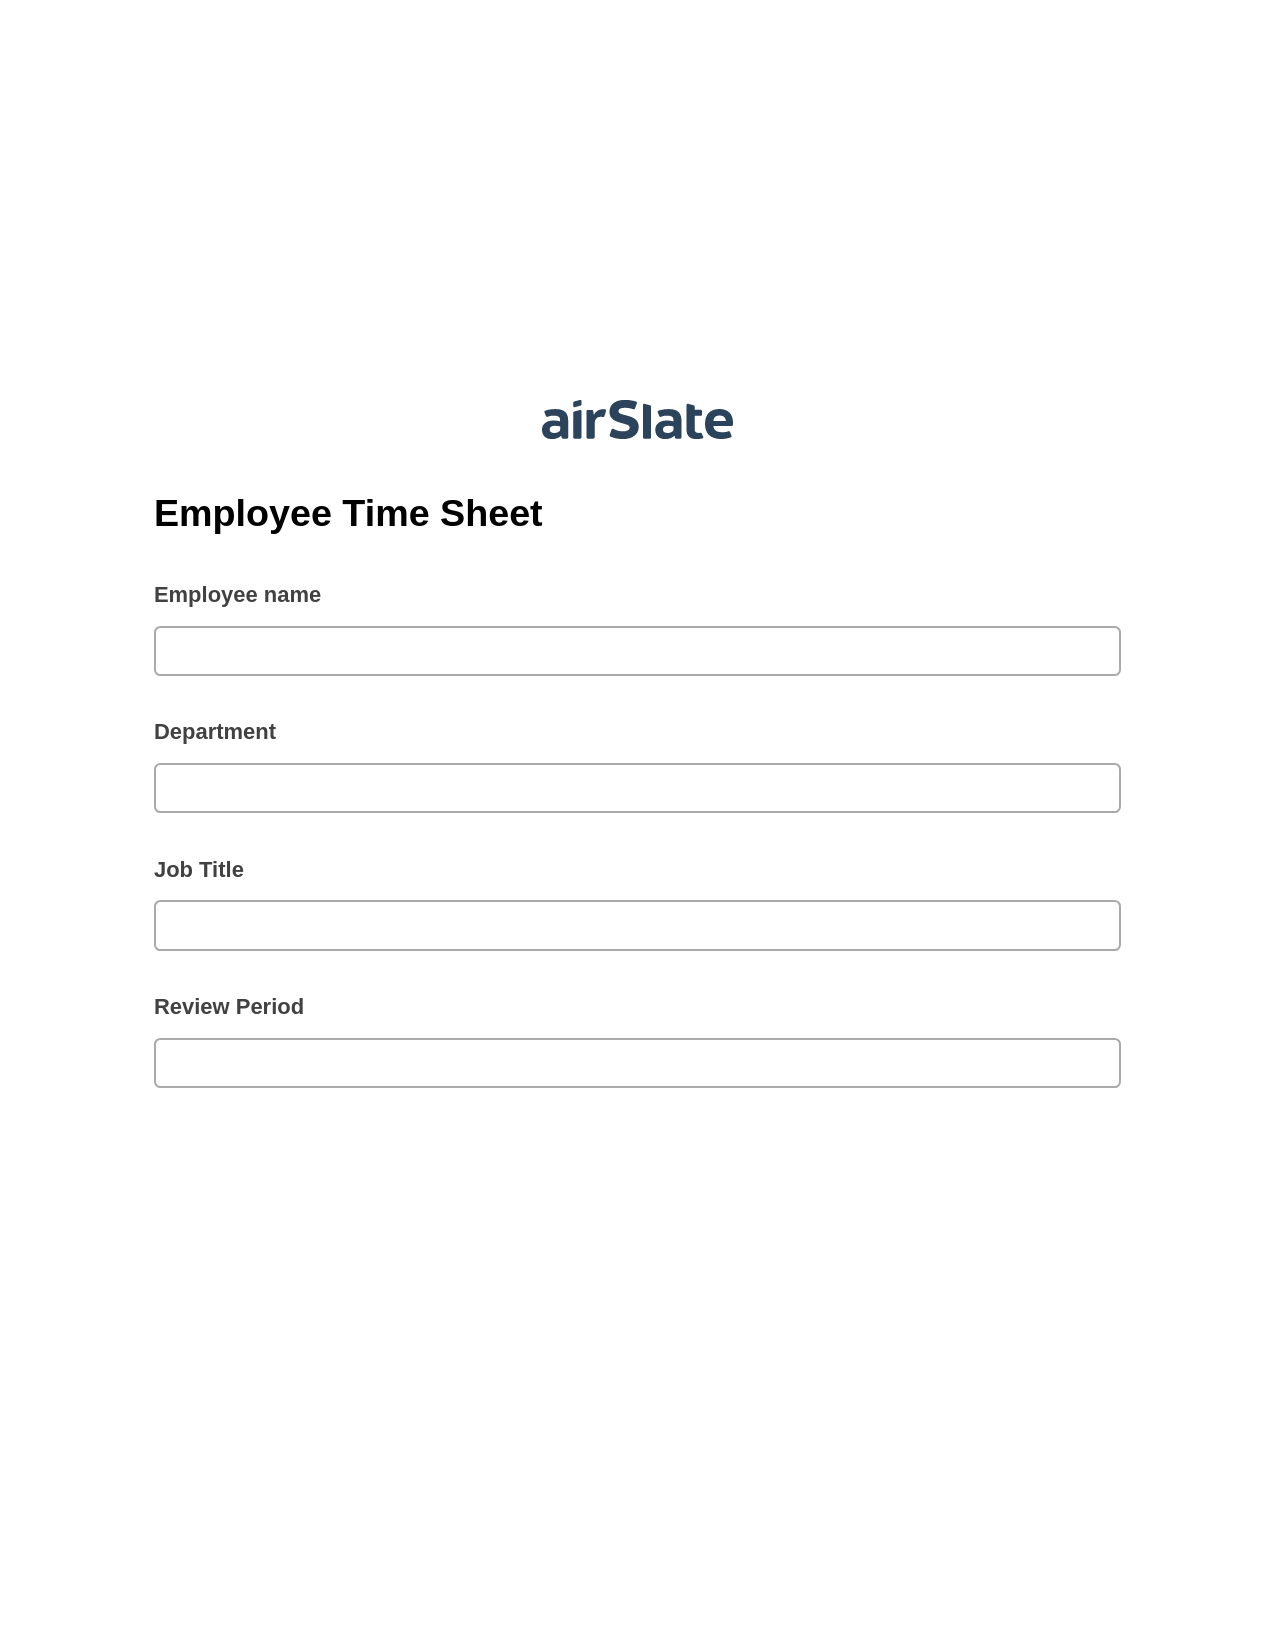 Employee Time Sheet Pre-fill from Excel Spreadsheet Bot, Create Salesforce Records Bot, Export to Smartsheet